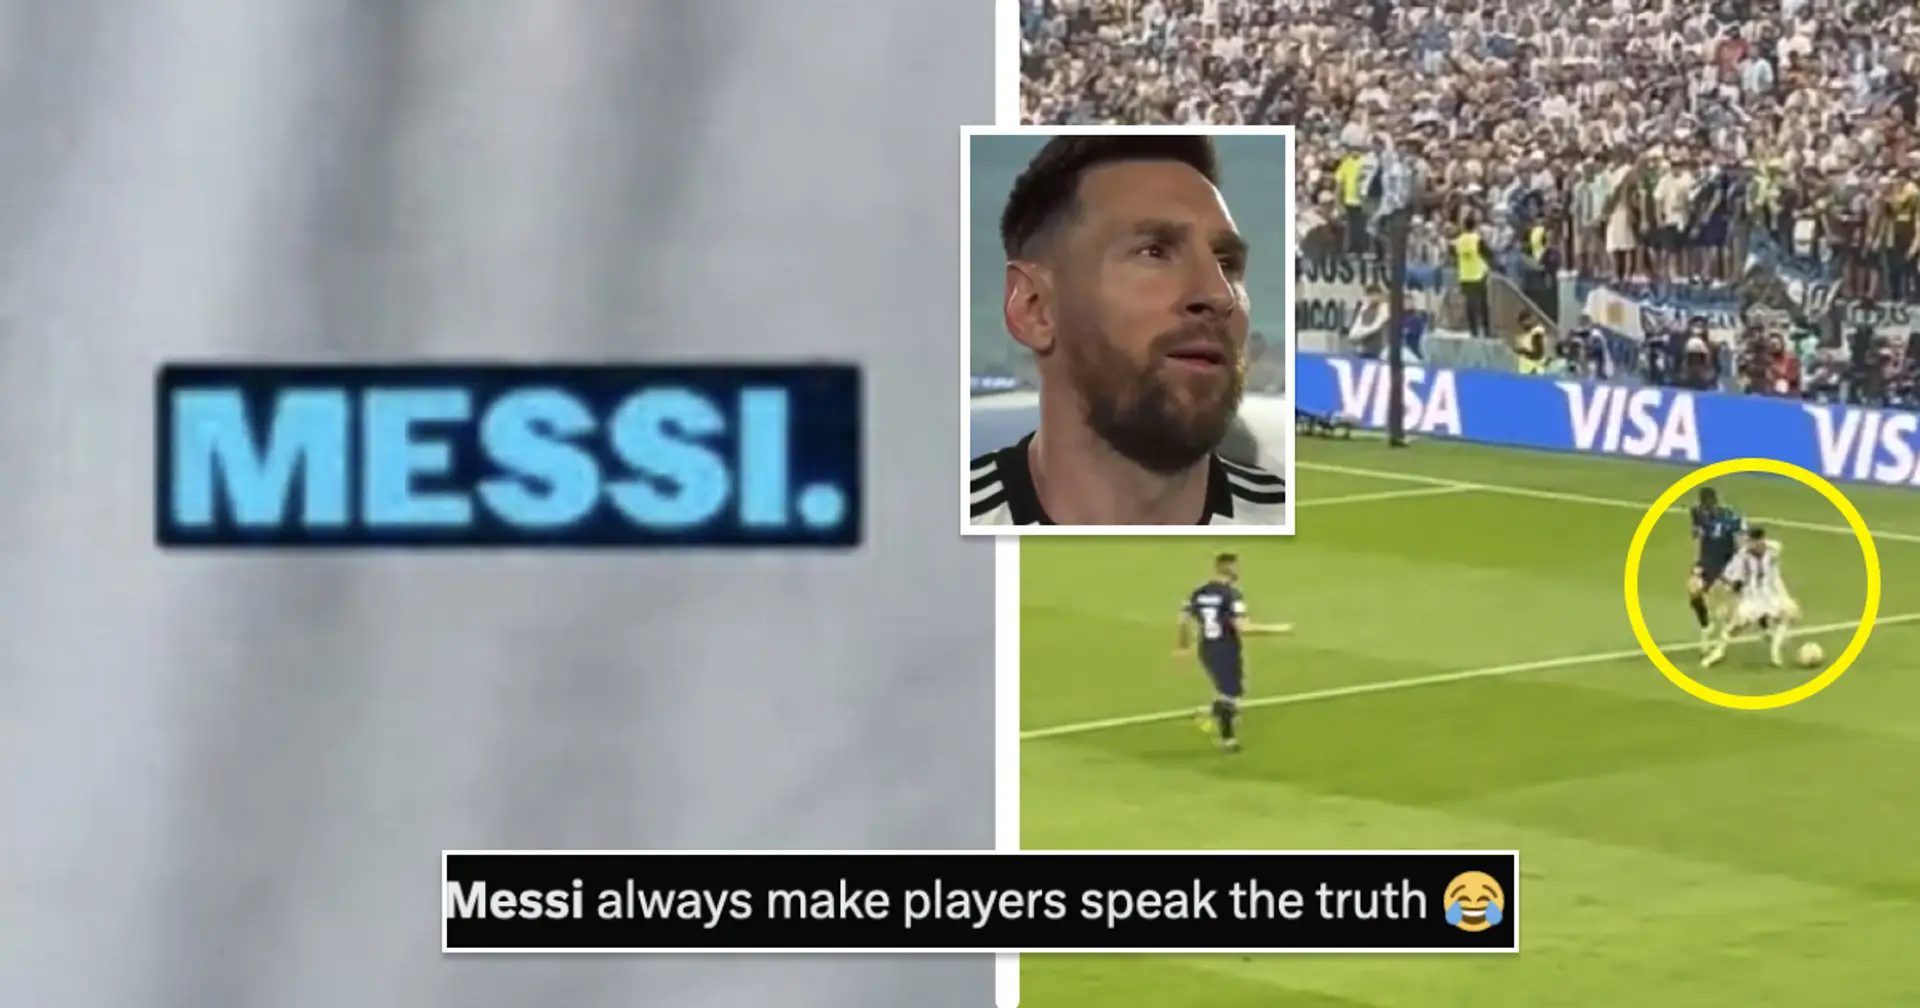 Man City's new €90m signing names Messi as idol – Leo completely destroyed him at World Cup